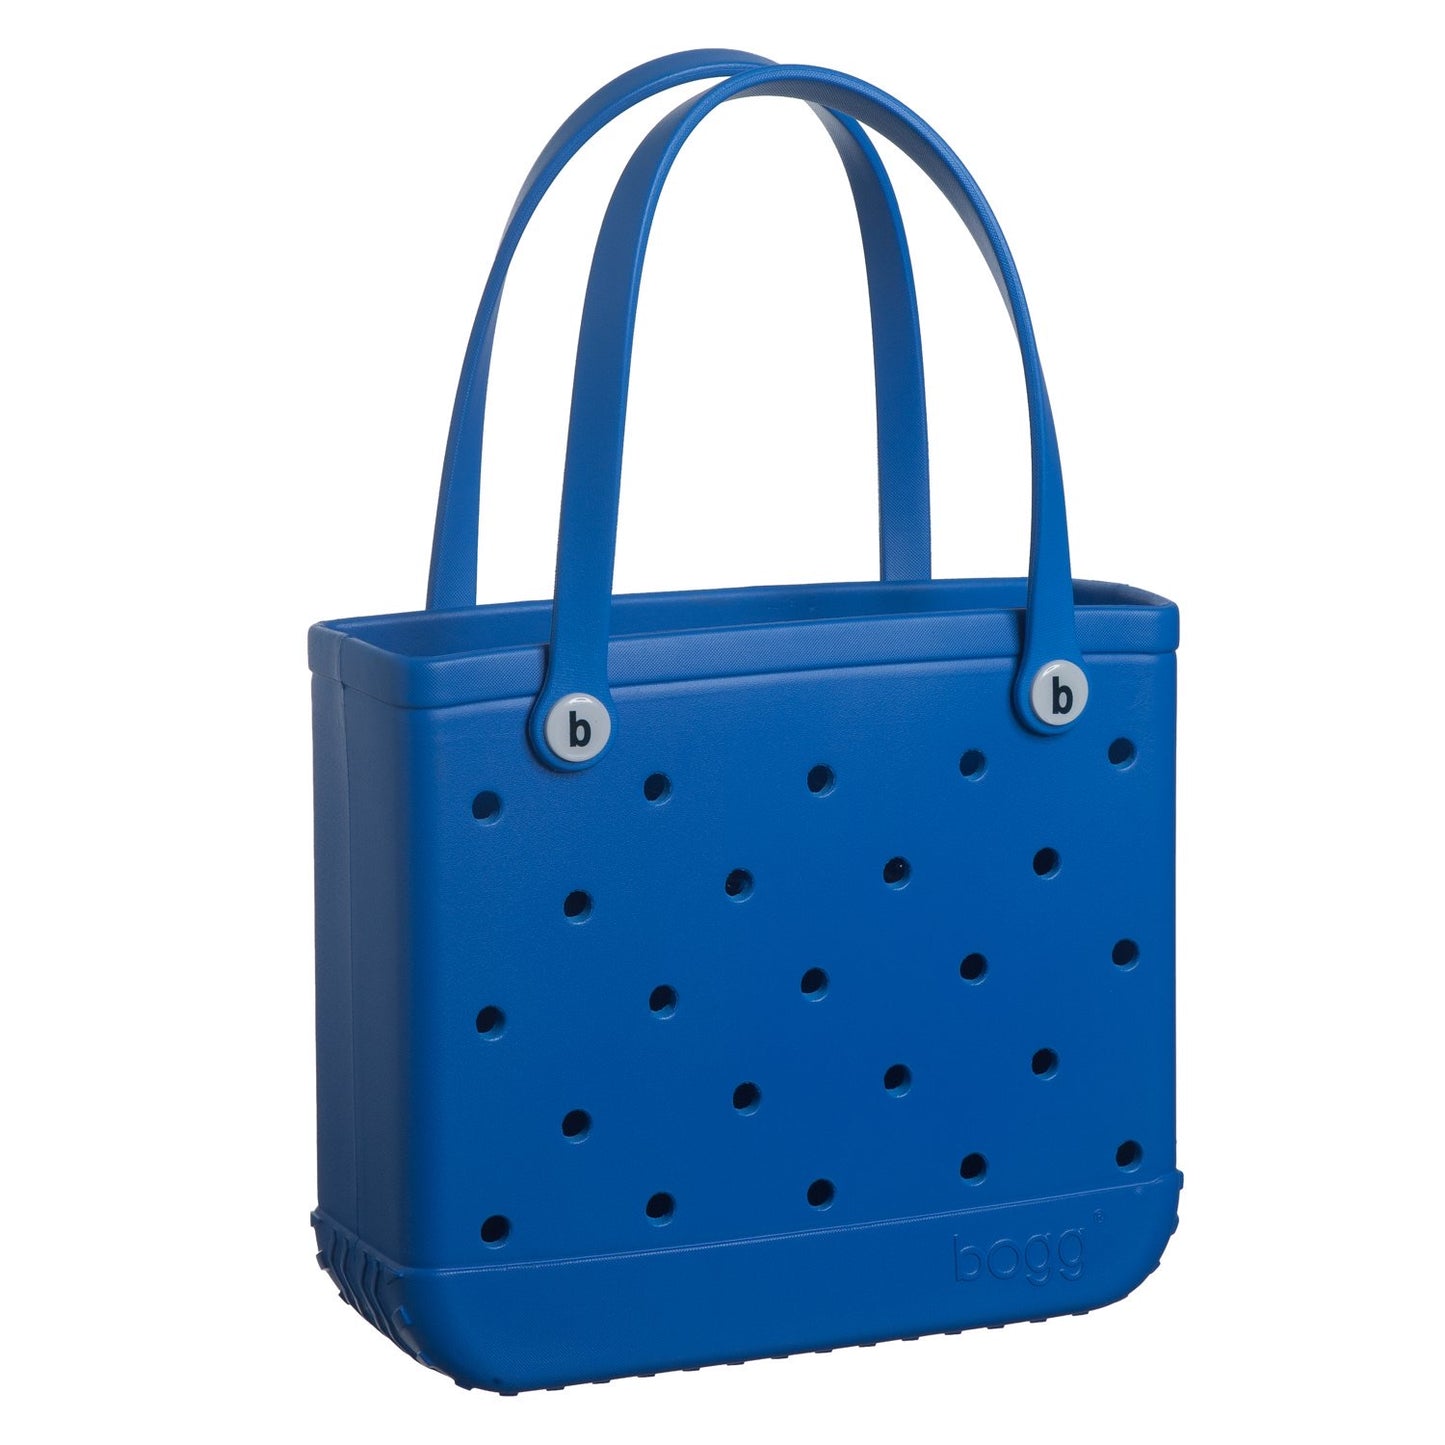 Baby Bogg Bag | Multiple Colors